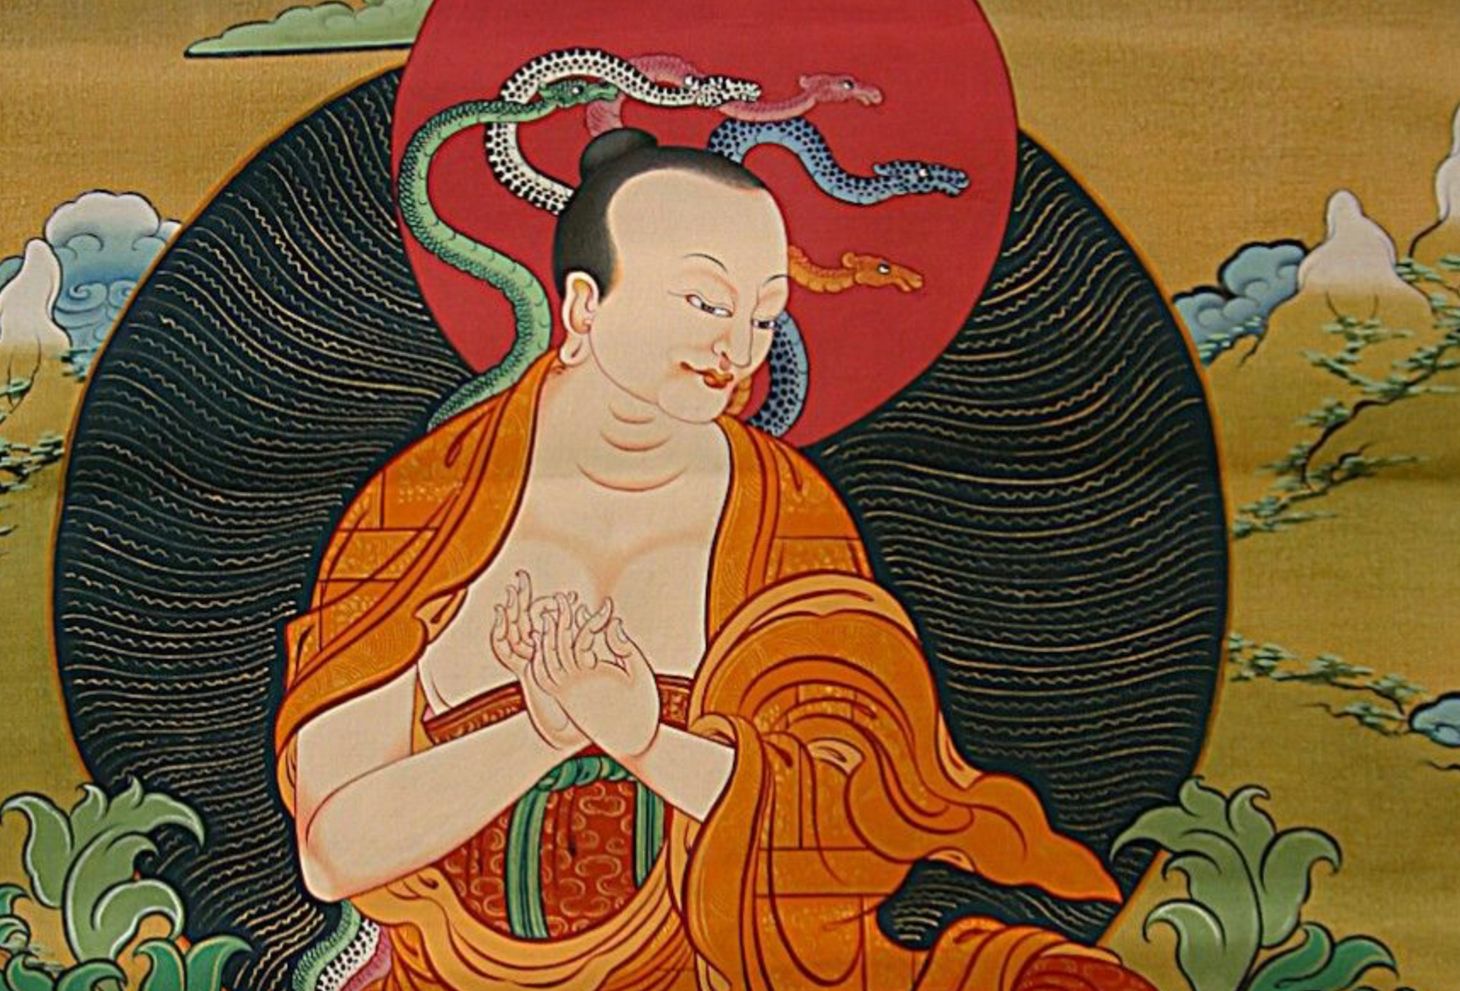 A colourful painting of Indian philosopher Nāgārjuna with five snakes just hanging out on his shoulders.